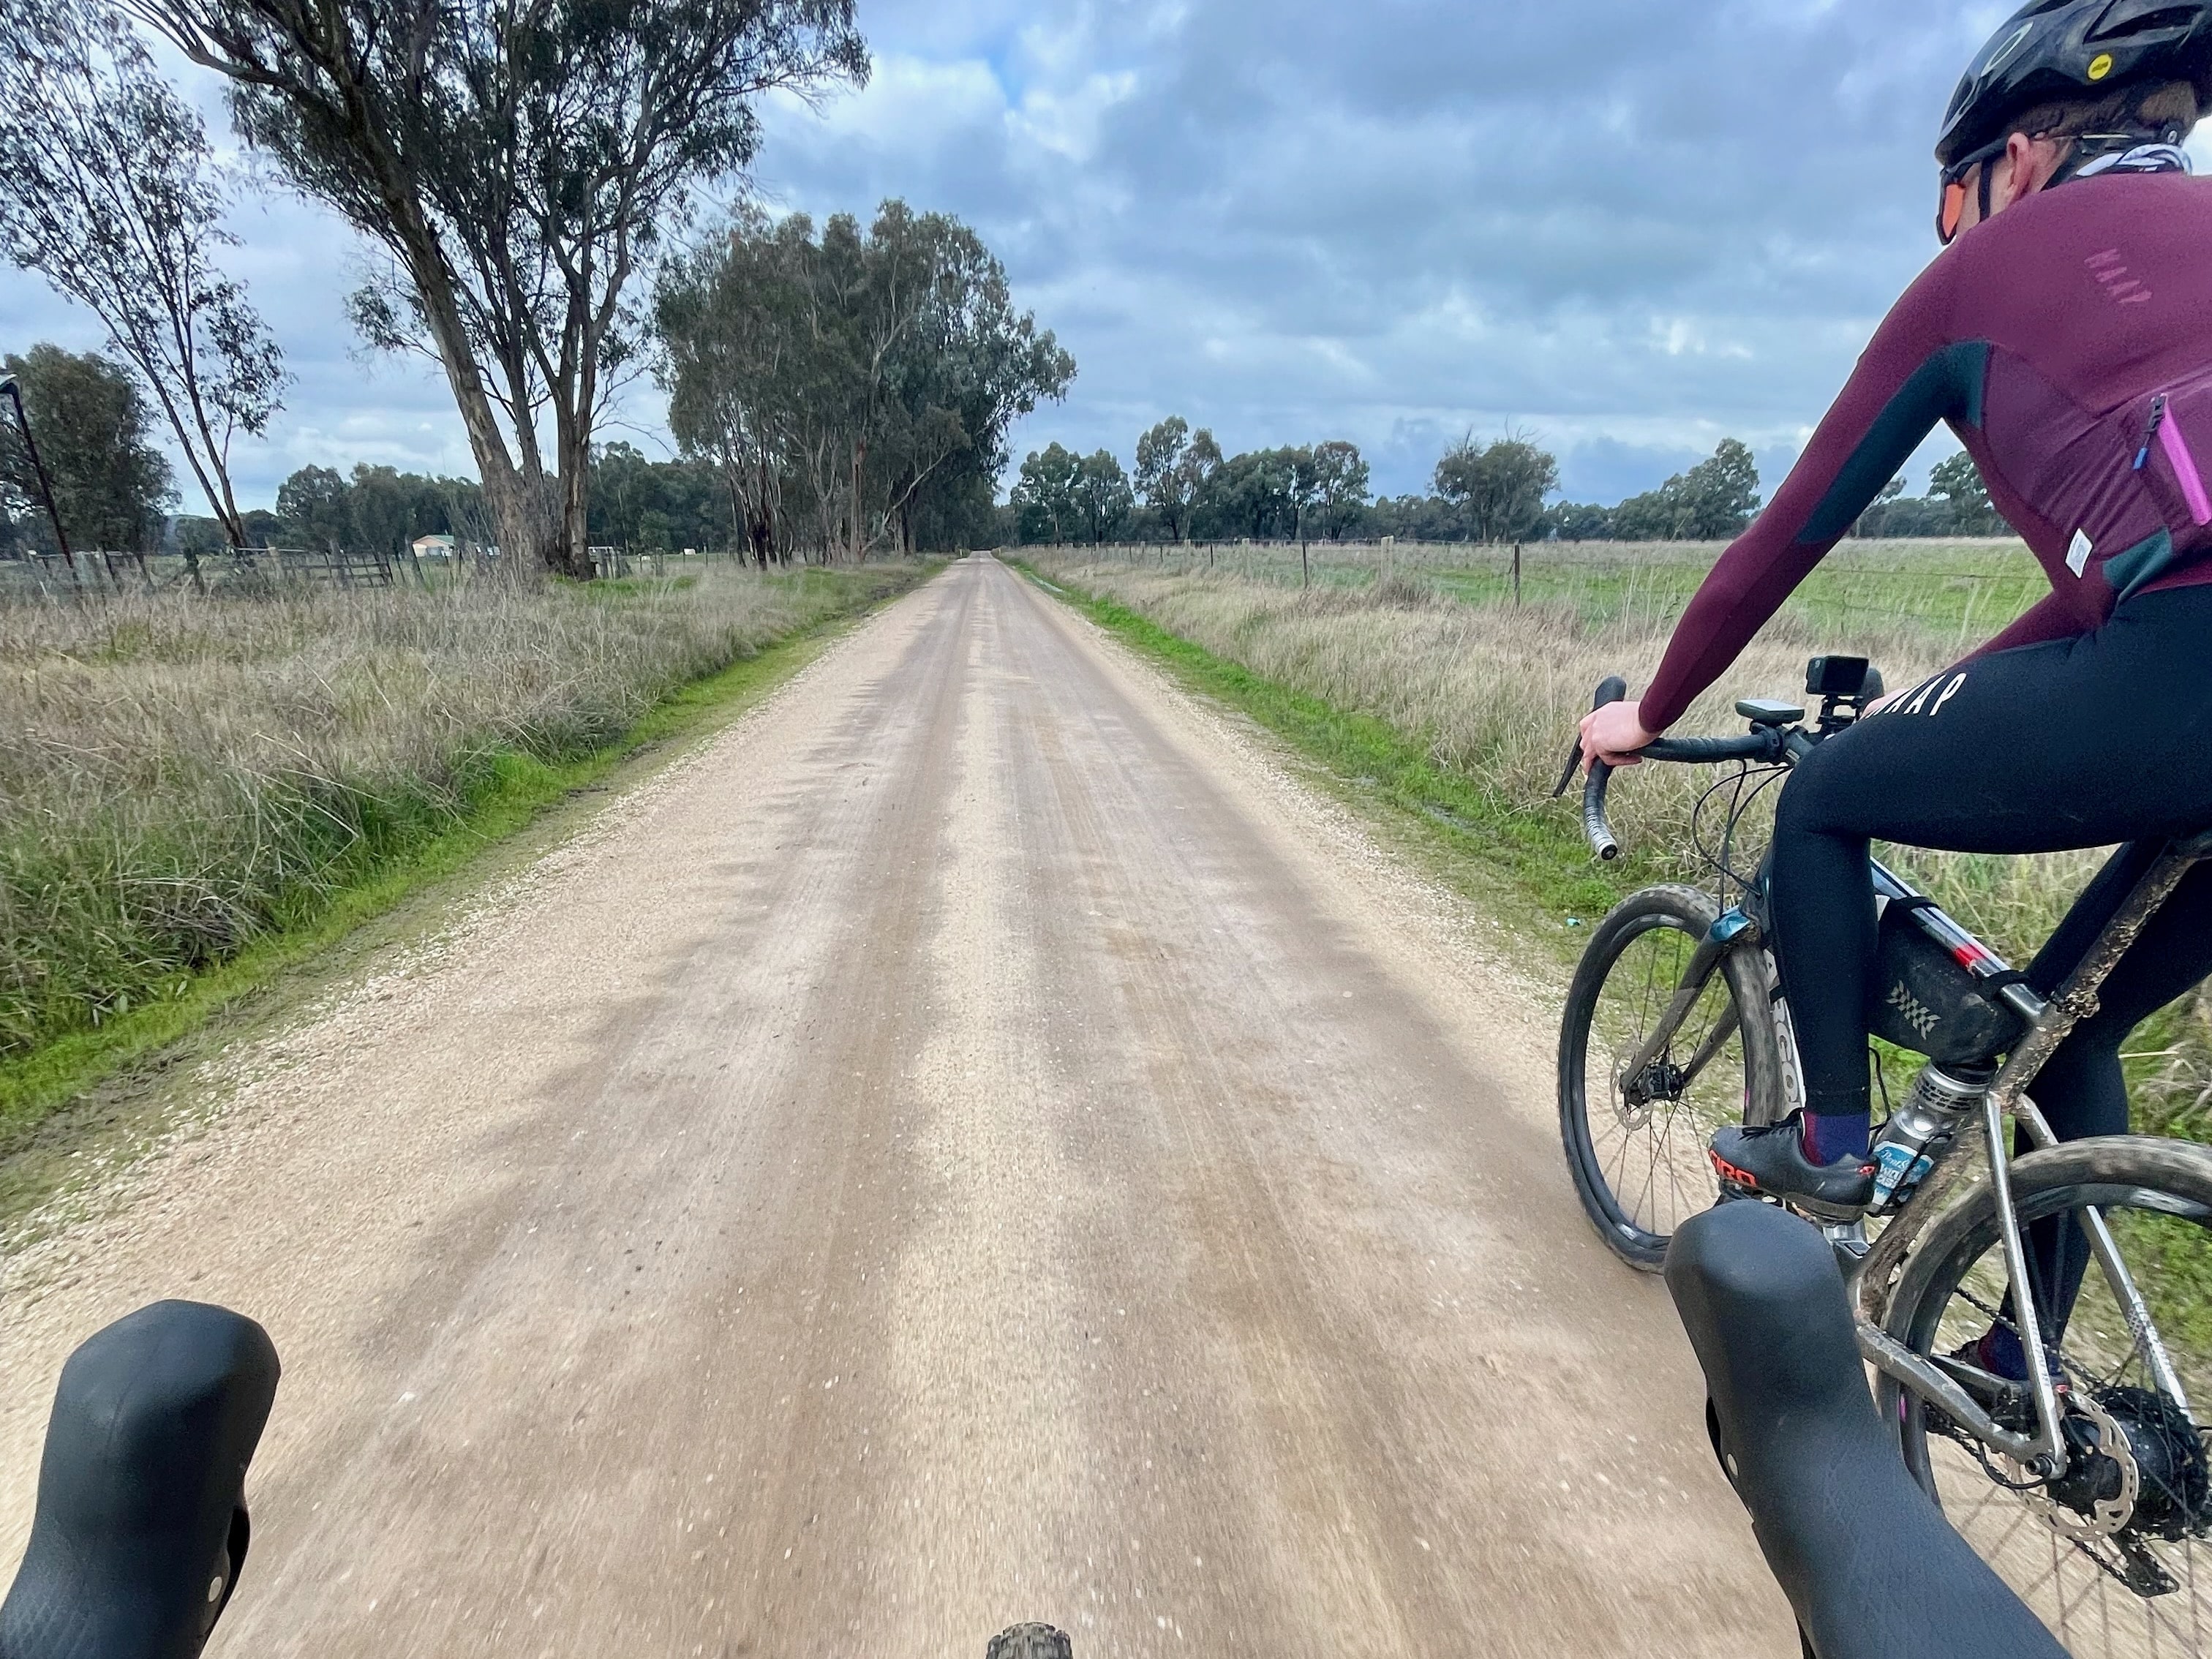 Two cyclists gravel riding on a smooth dirt road surrounded by open farmland and native bushland in the background